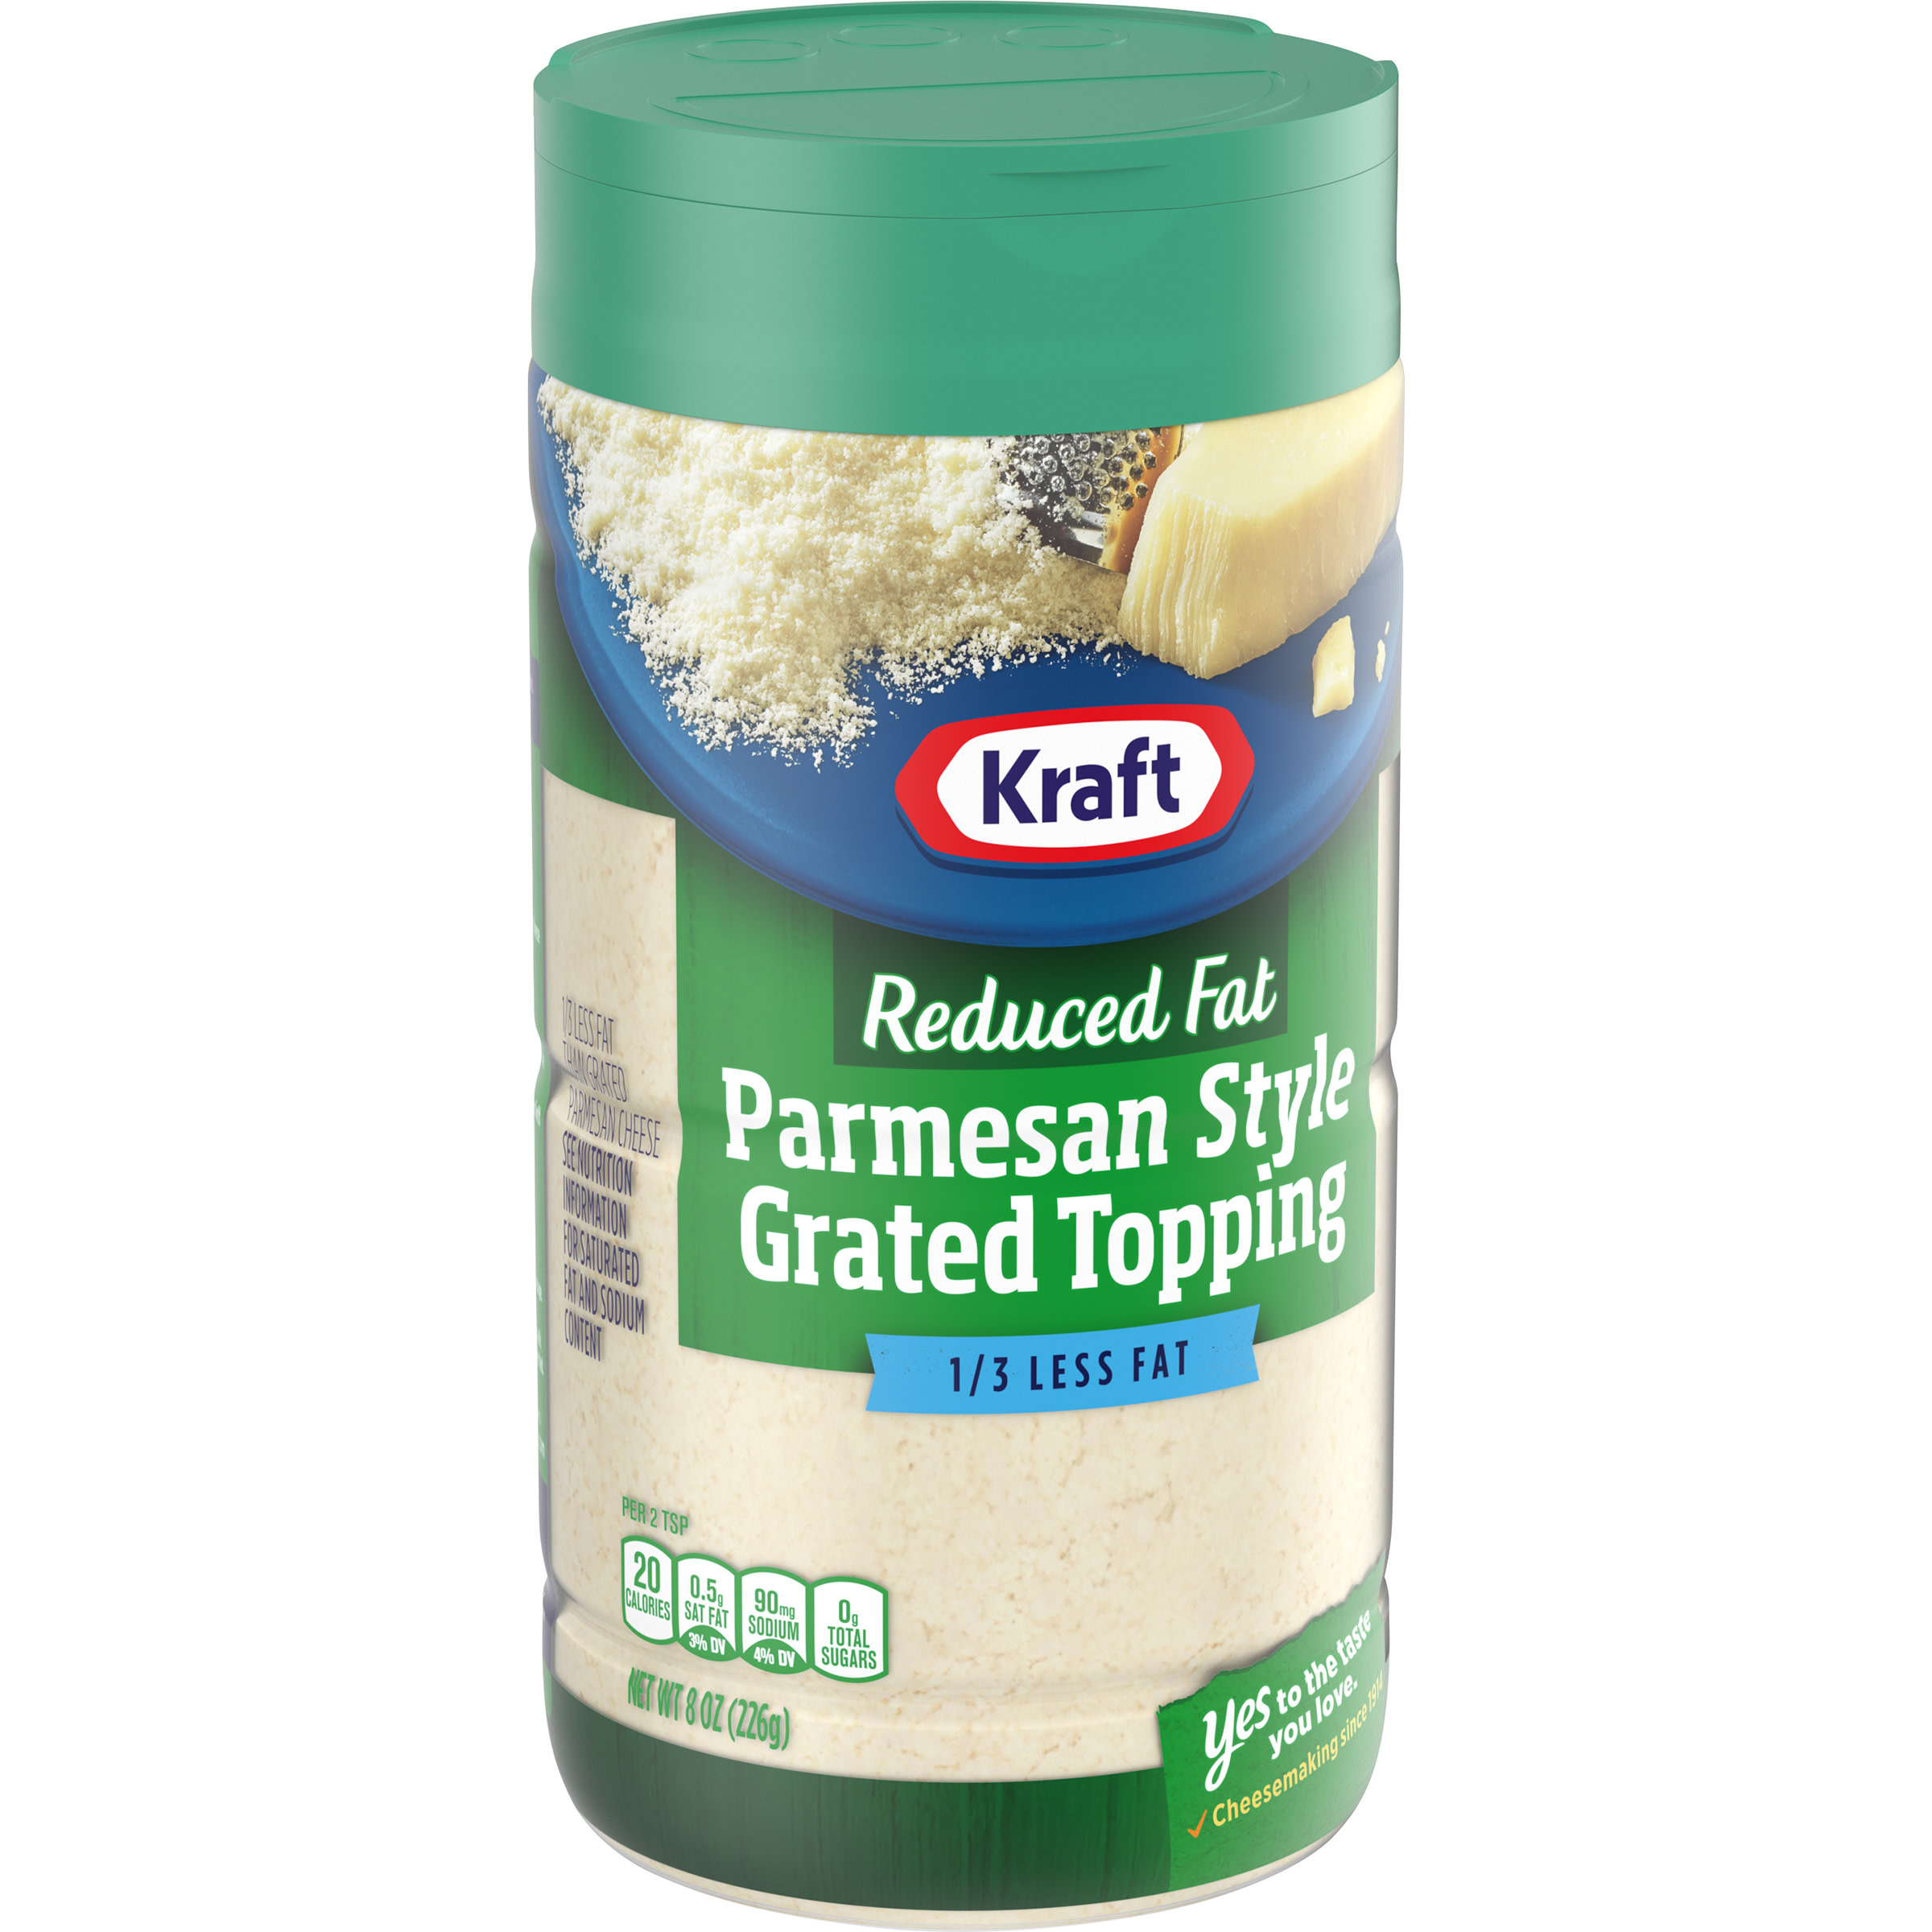 Kraft Parmesan Style Reduced Fat Grated Cheese Topping, 8 oz Shaker - image 3 of 8